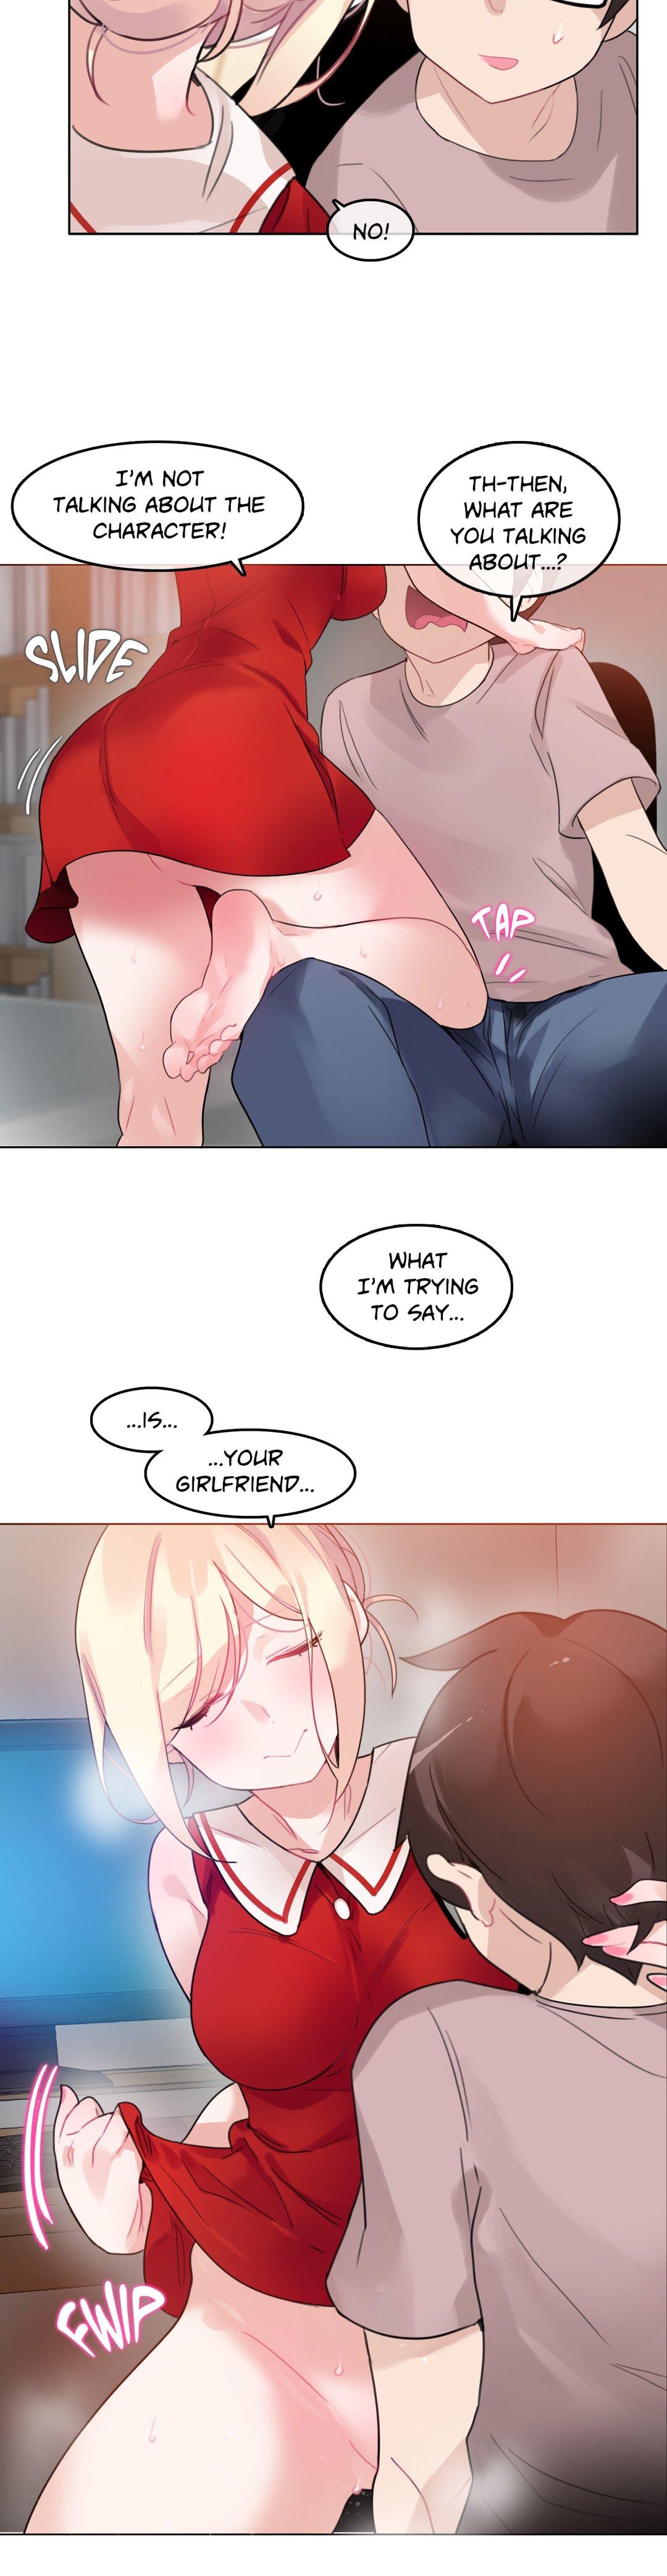 A Pervert's Daily Life • Chapter 36-40 38